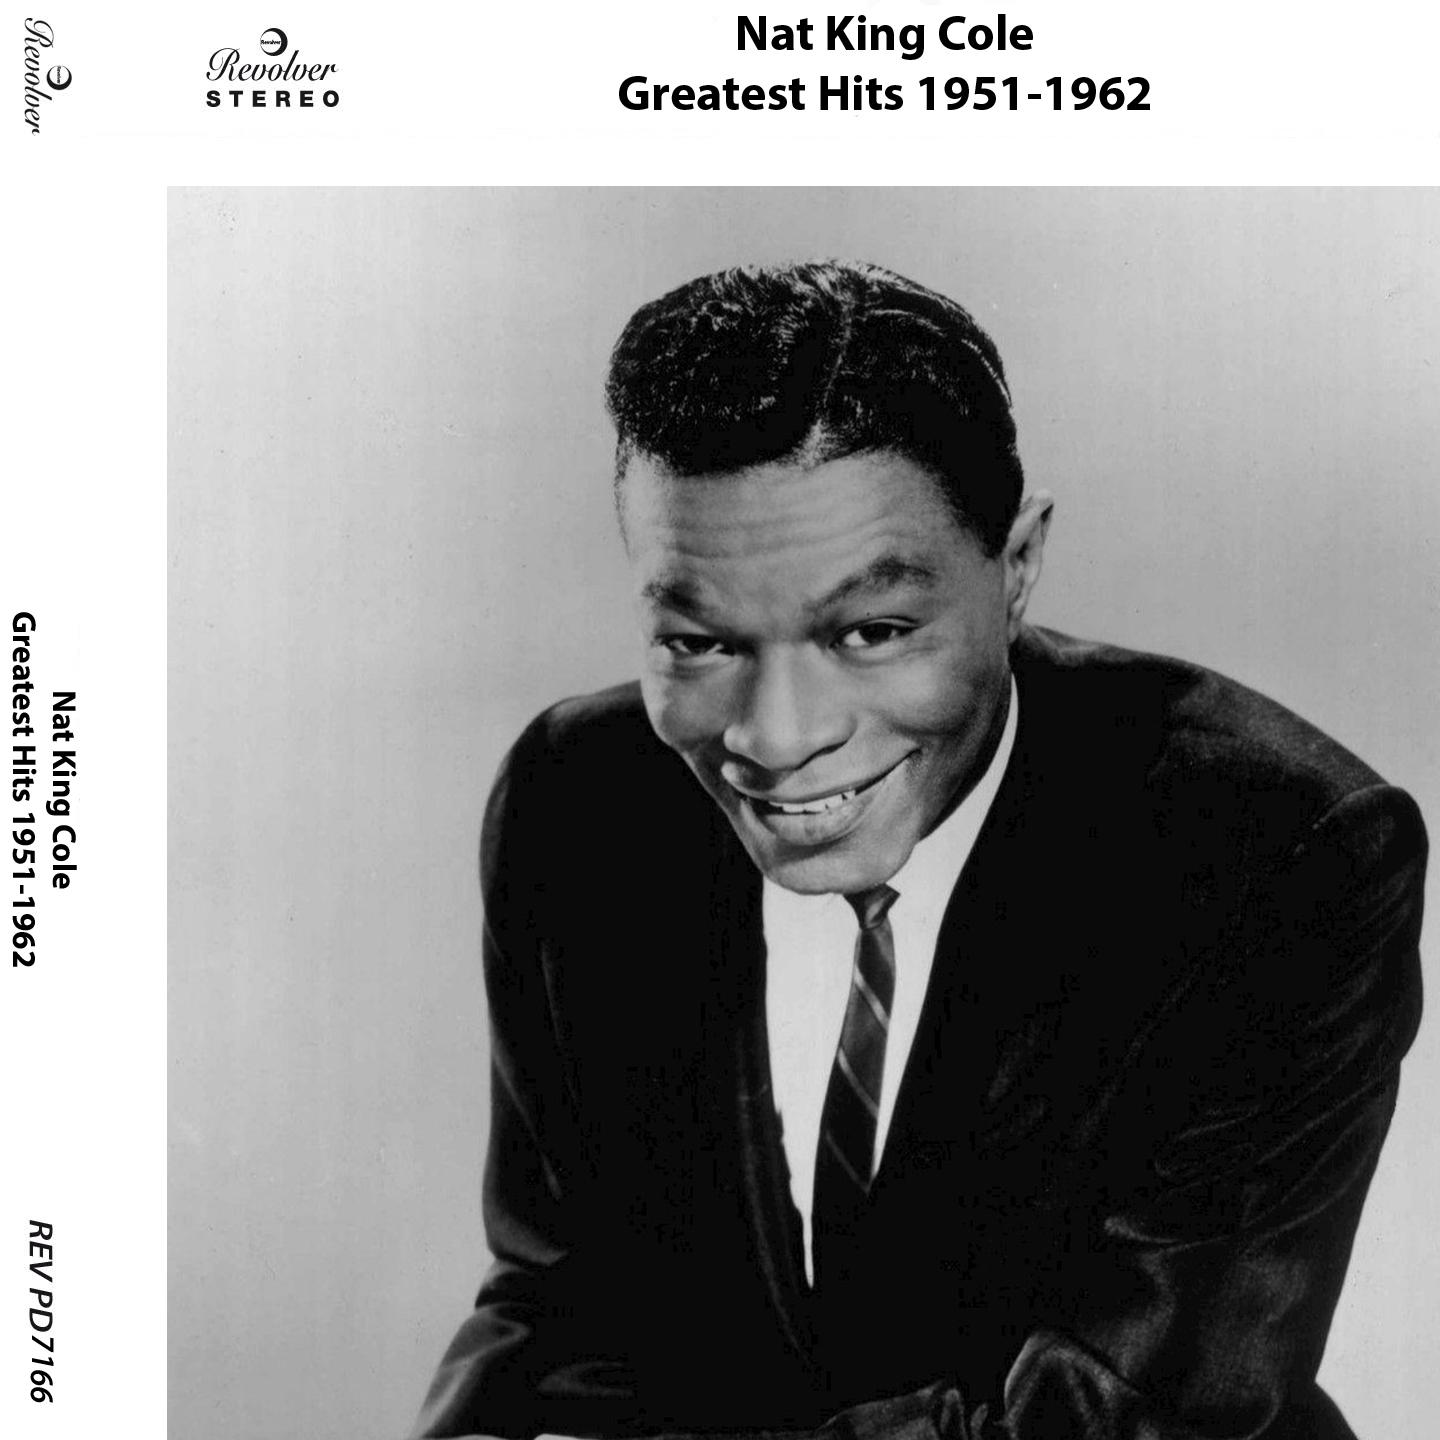 Nat King Cole's Greatest Hits: 1951-1962